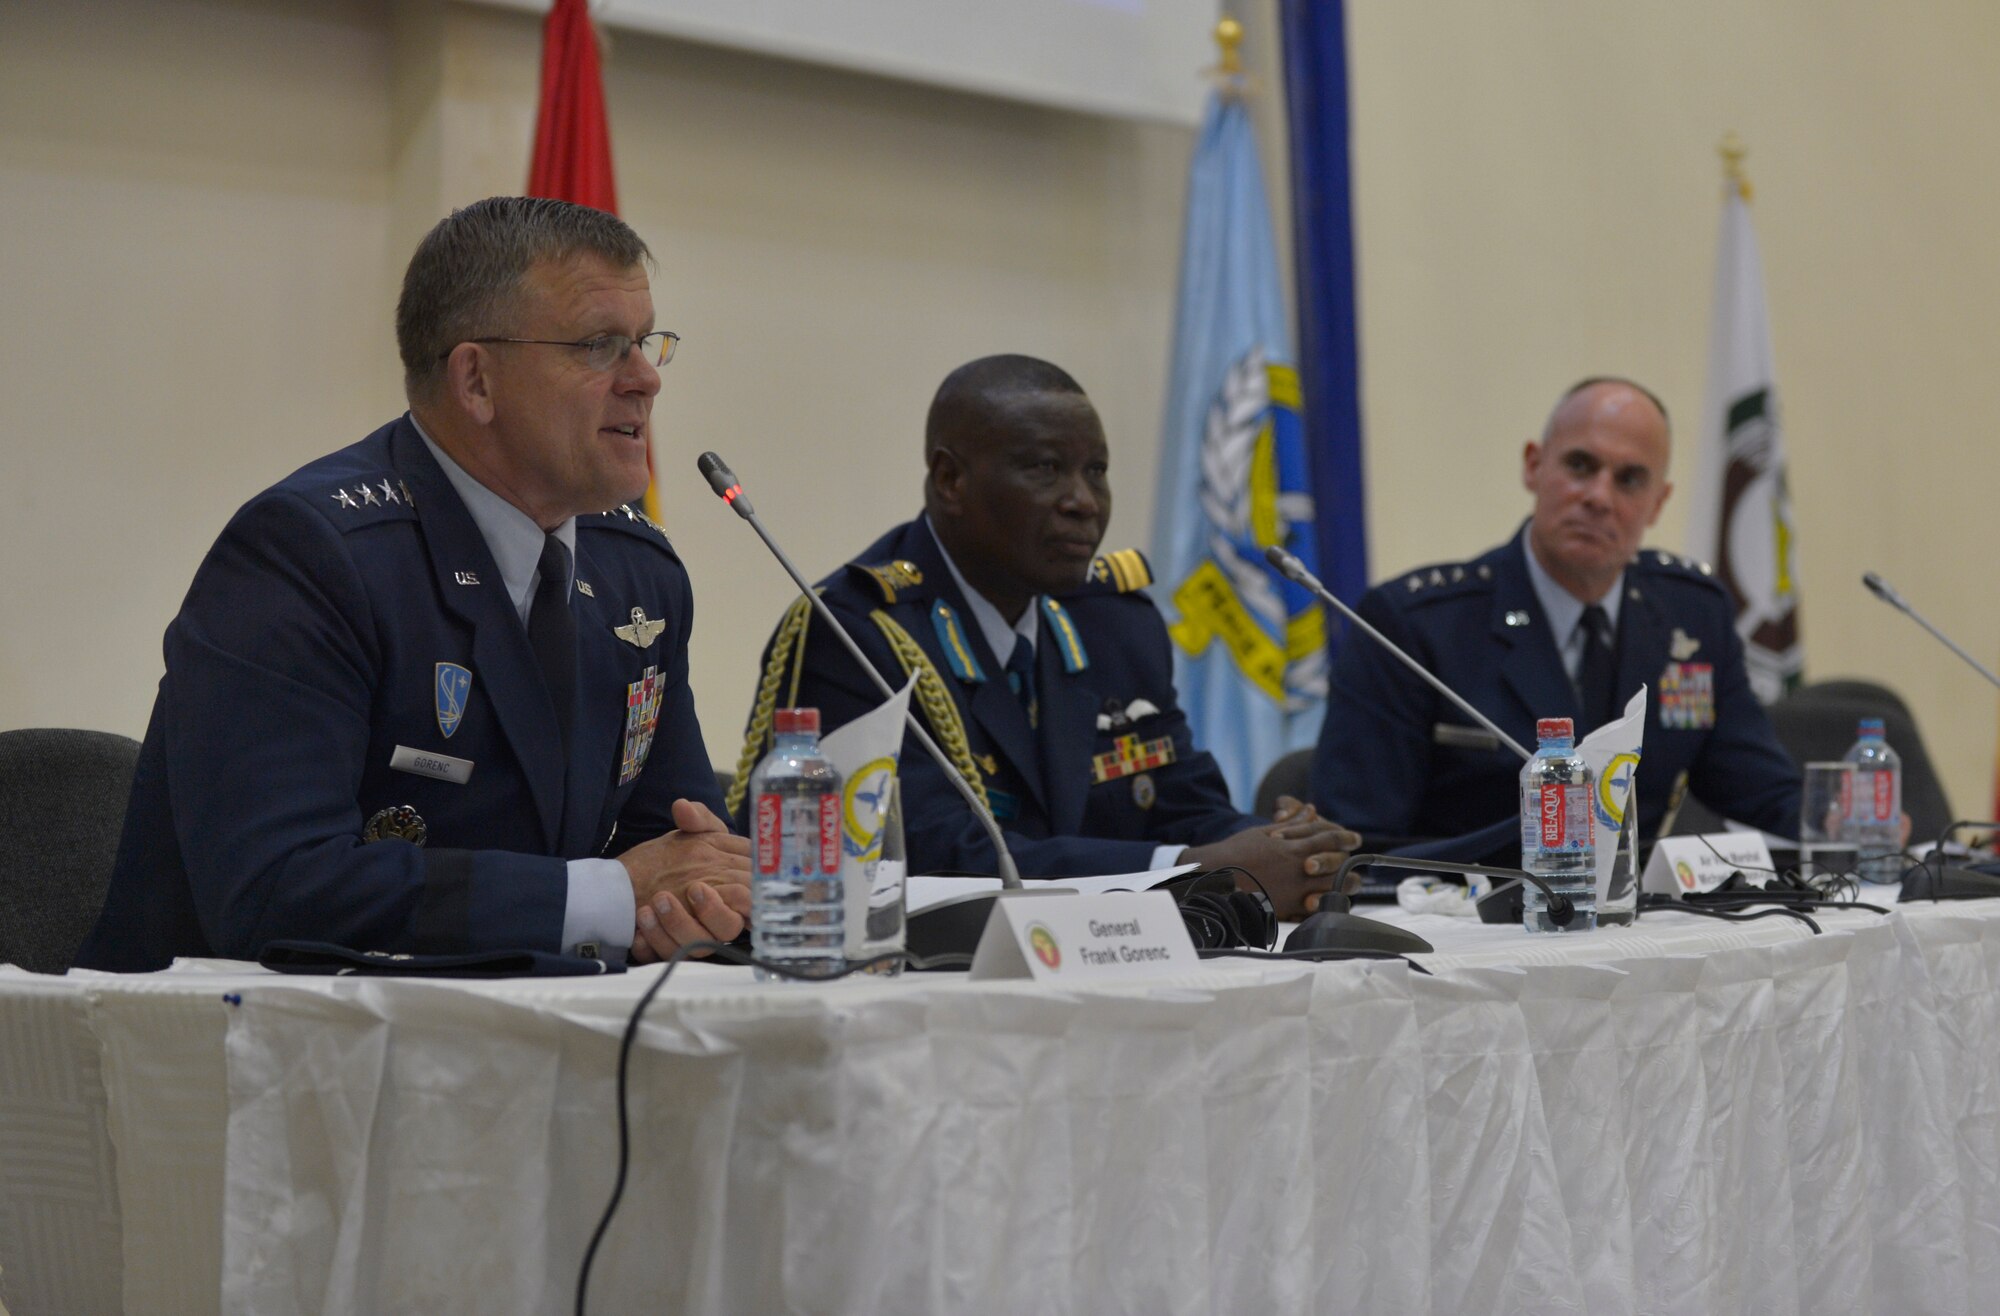 From left to right, Gen. Frank Gorenc, U.S. Air Forces in Europe and Air Forces Africa commander, Air Vice Marshal Michael Samson-Oje, Ghanaian chief of air staff, and Lt. Gen. Craig A. Franklin, 3rd Air Force commander, discuss the importance of regional cooperation with members of the local press in Africa, Aug. 20, 2013, Accra, Ghana. The Regional African Air Chiefs Symposium brings air chiefs together to discuss how their unique air capabilities can be collaborated to resolve regional issues. (U.S. Air Force photo by Airman 1st Class Jordan Castelan/Released)
